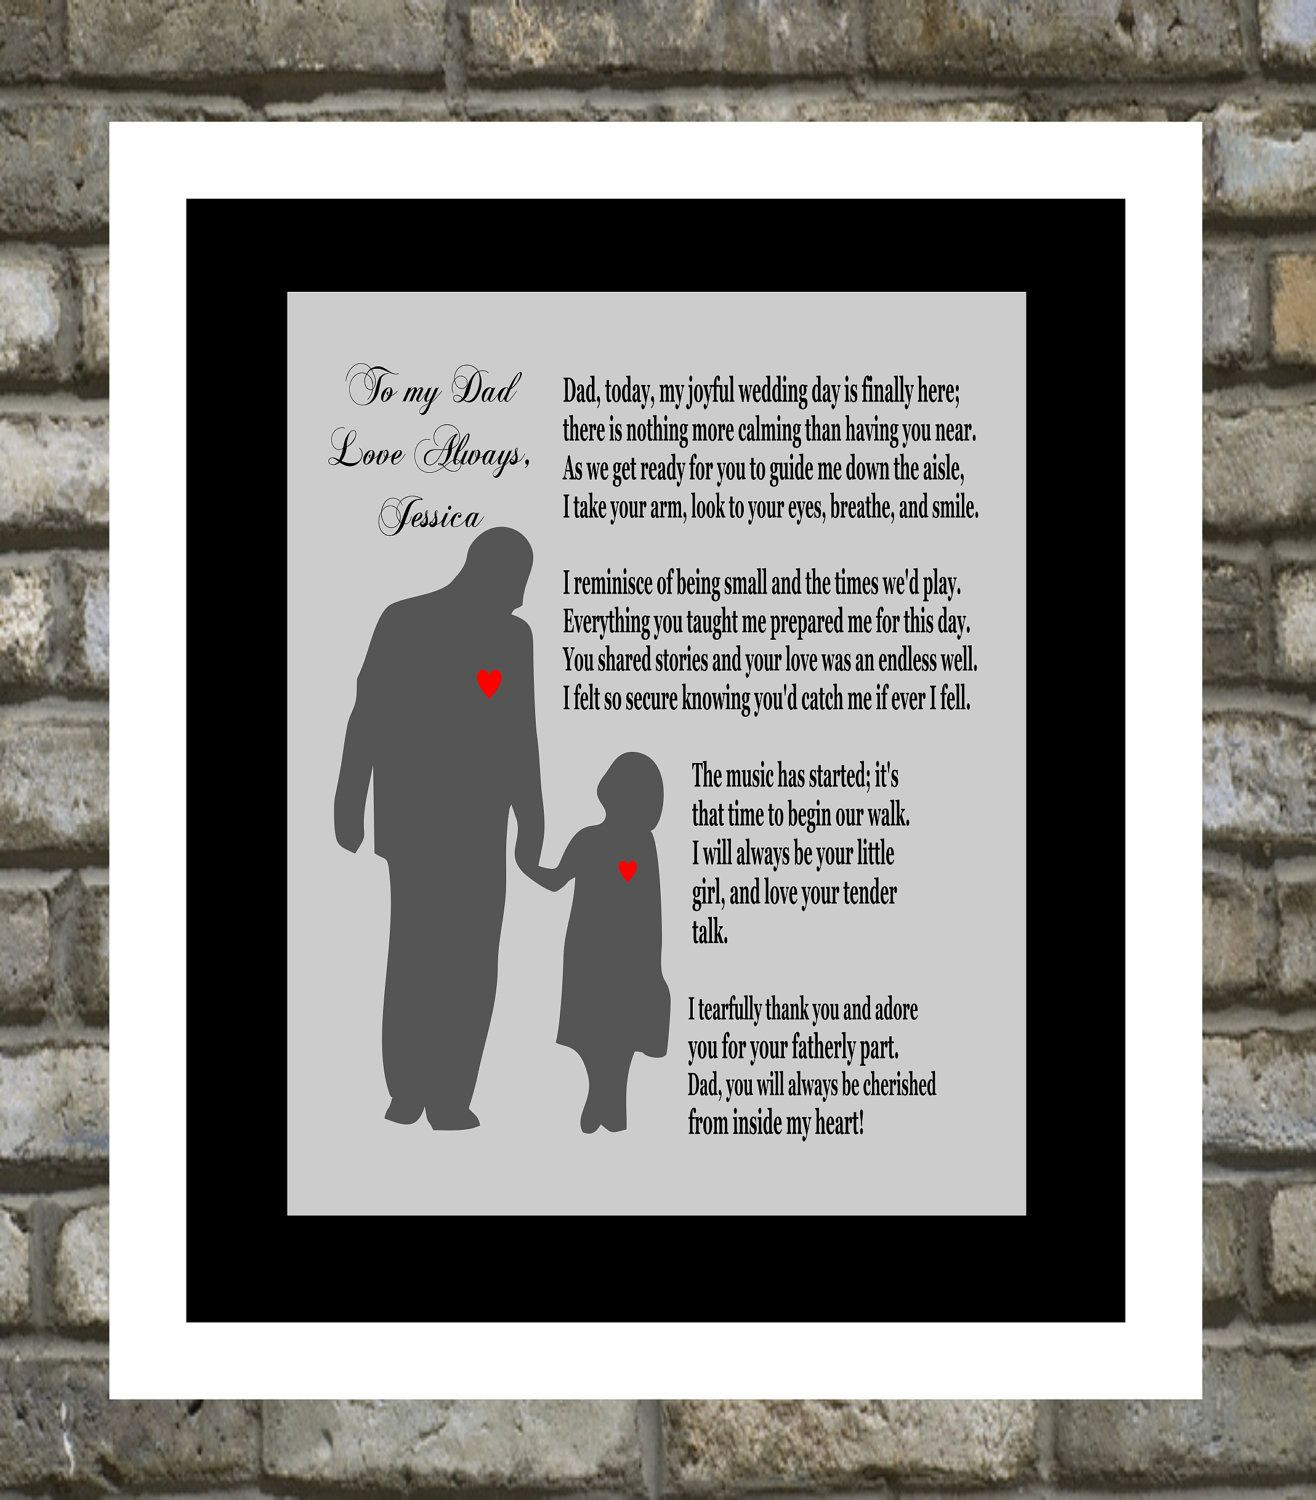 Unique Father Of The Bride Gift Ideas
 Personalized Wedding Gift Father The Bride Thank You